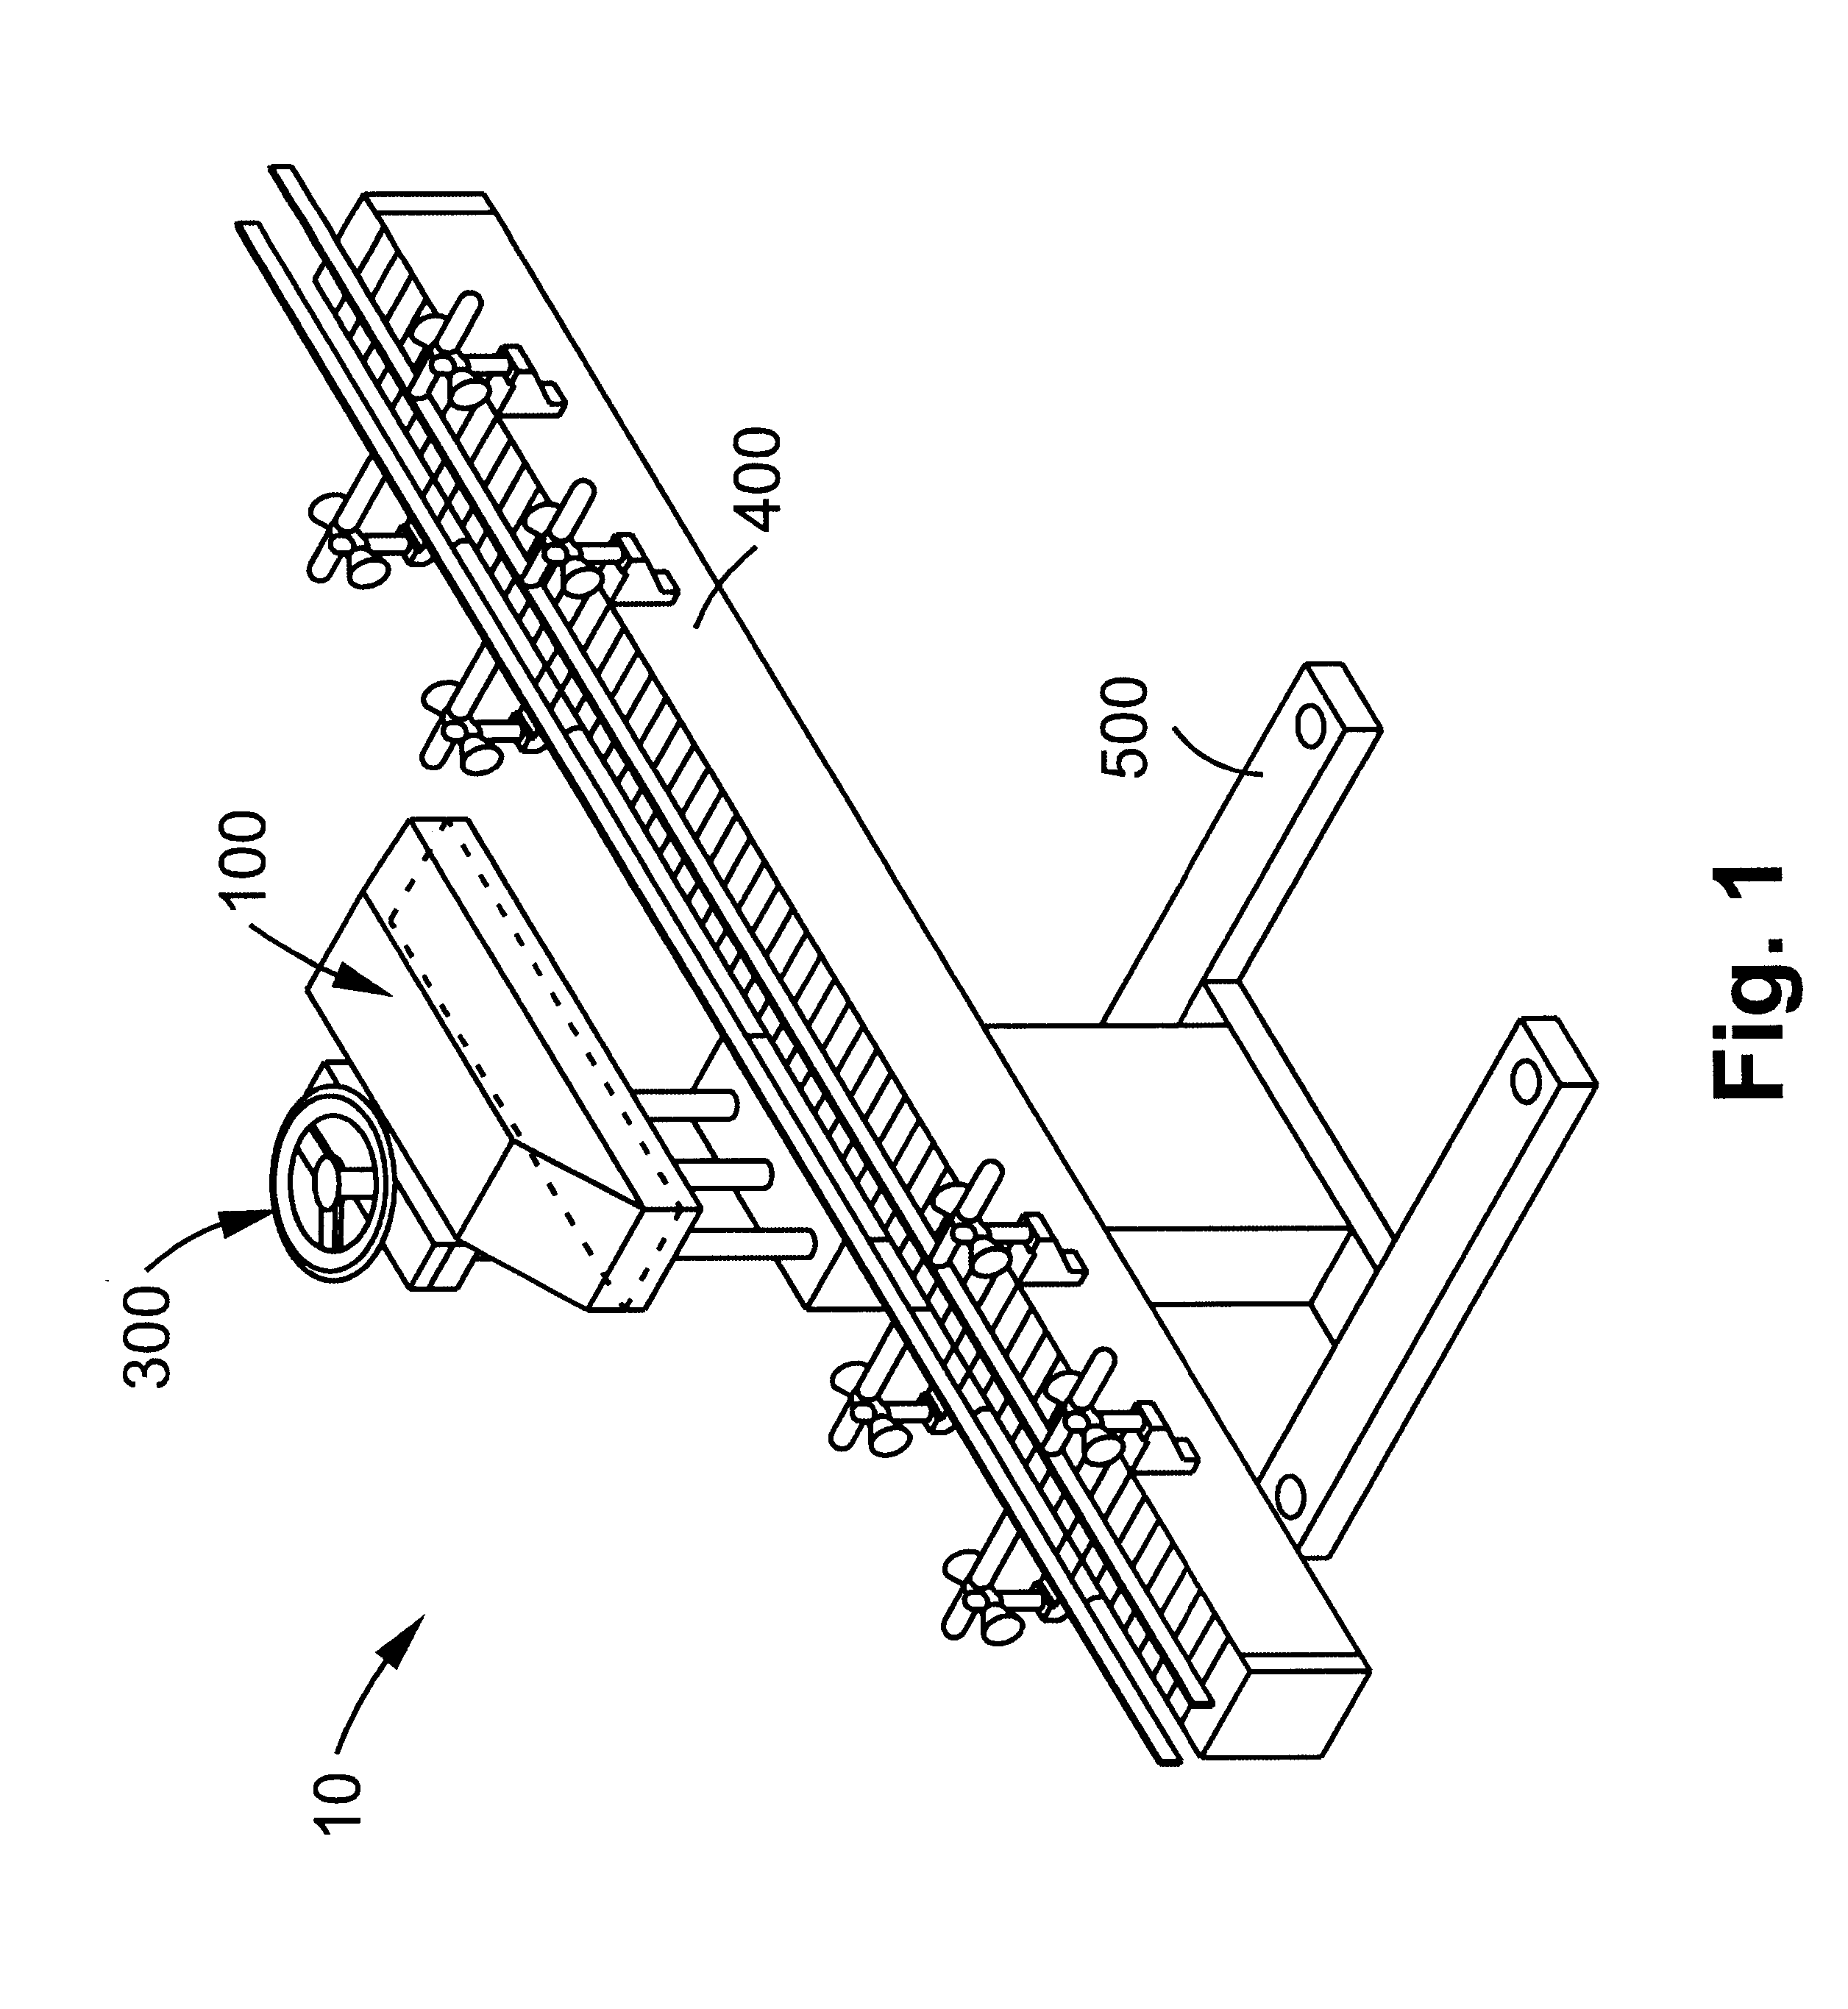 Slotted induction heater